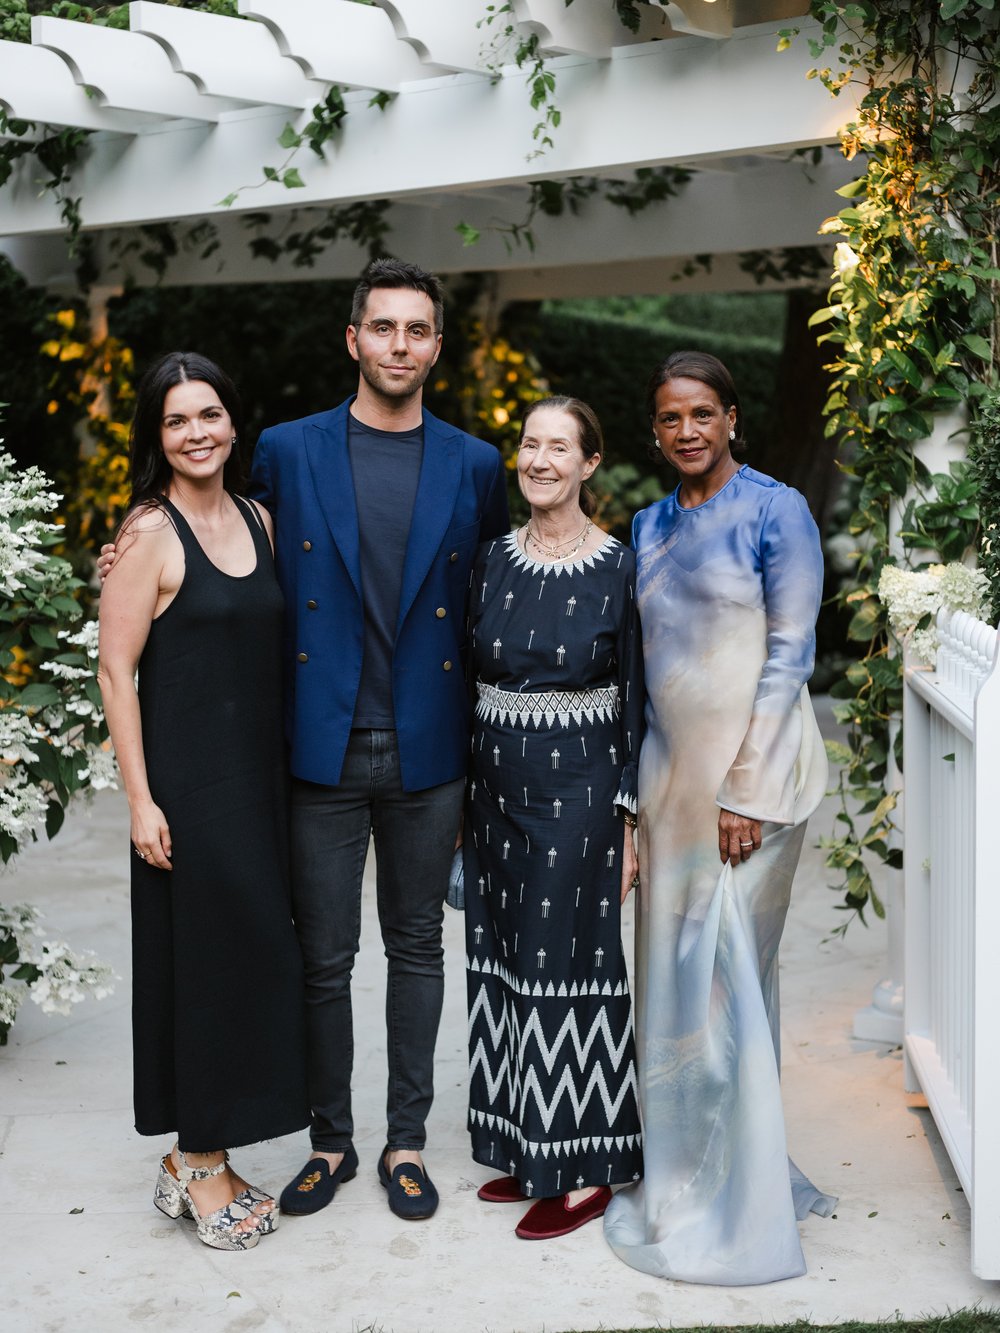    Photo: Ben Rosser/BFA.com     7/14    Katie Lee Biegel, Mark Mullett, Jenny Landey, and Mireya D'Angelo attend An Intimate Dinner Hosted by Aerin Lauder and Amy Astley on Thursday, July 13, 2023.   